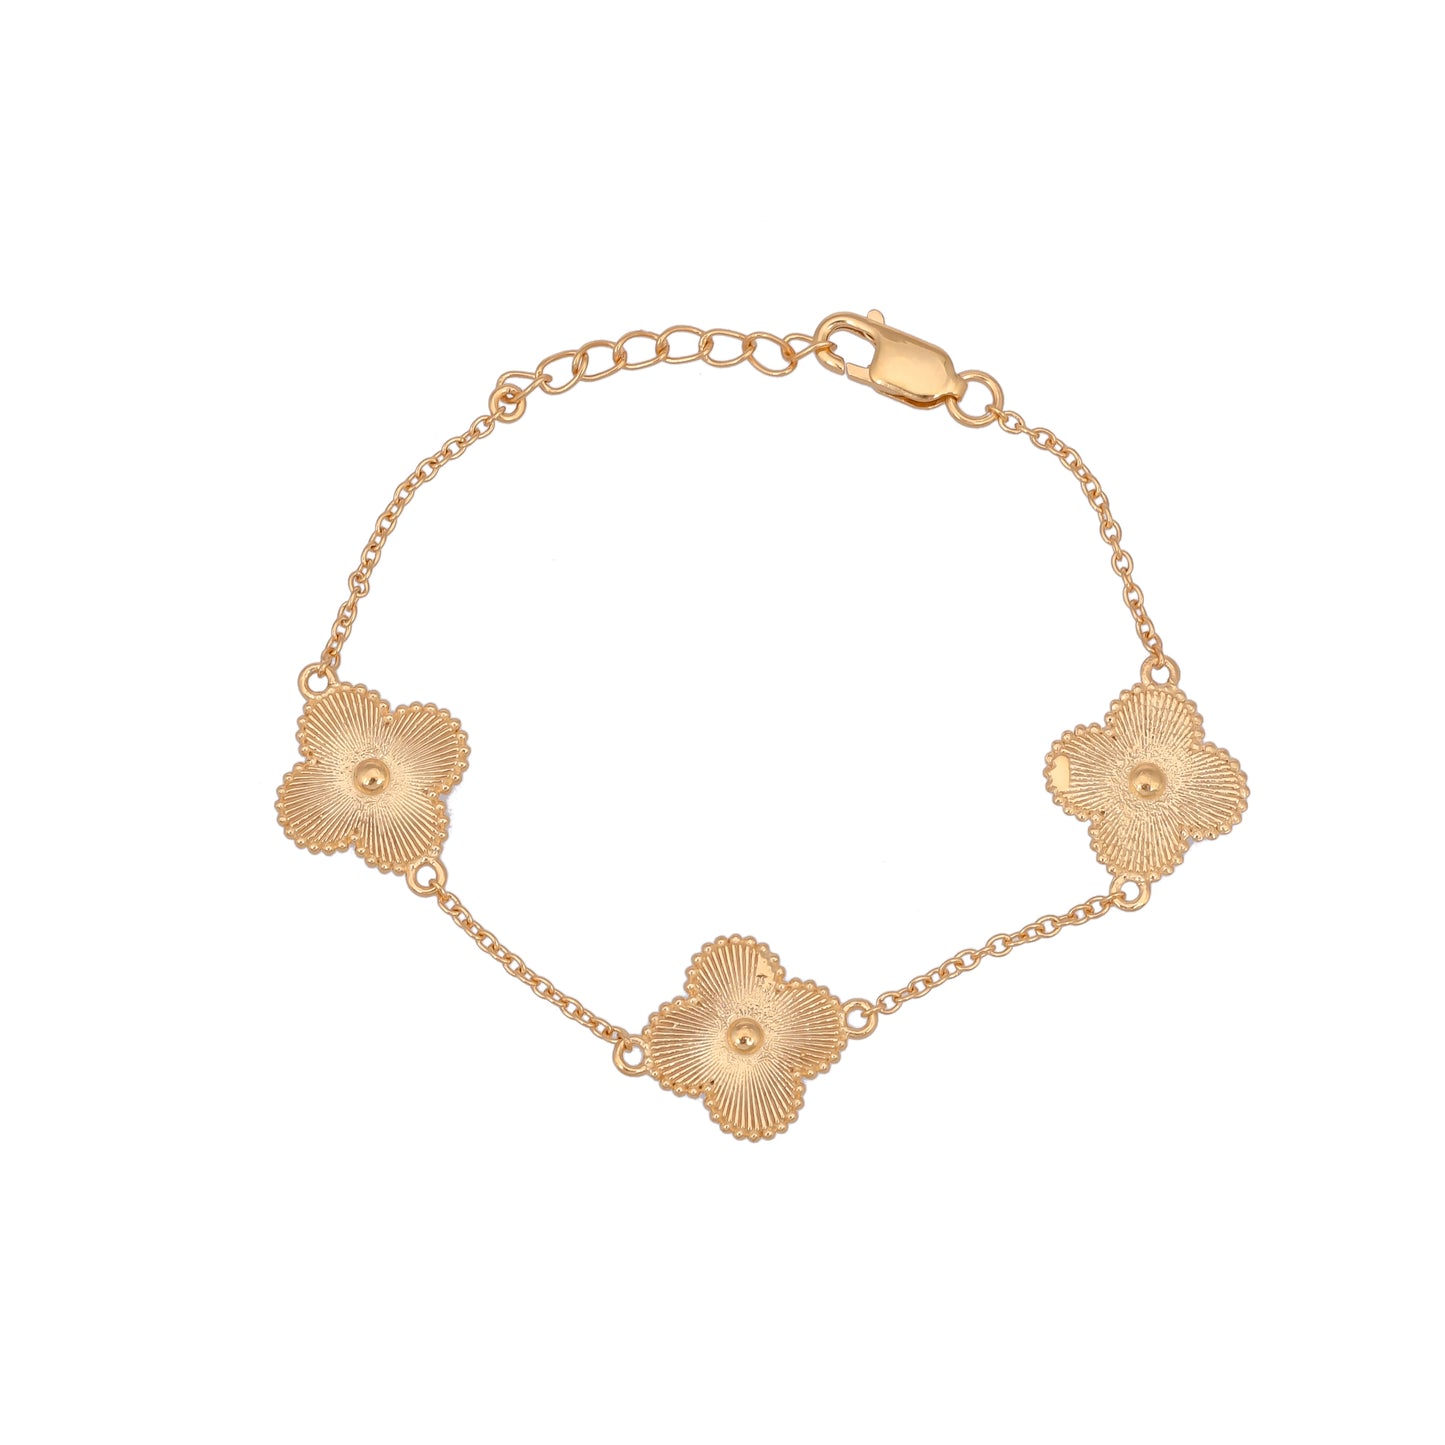 VC Gold Clover Bracelet| 925 Silver| Gold Plated - From Purl Purl